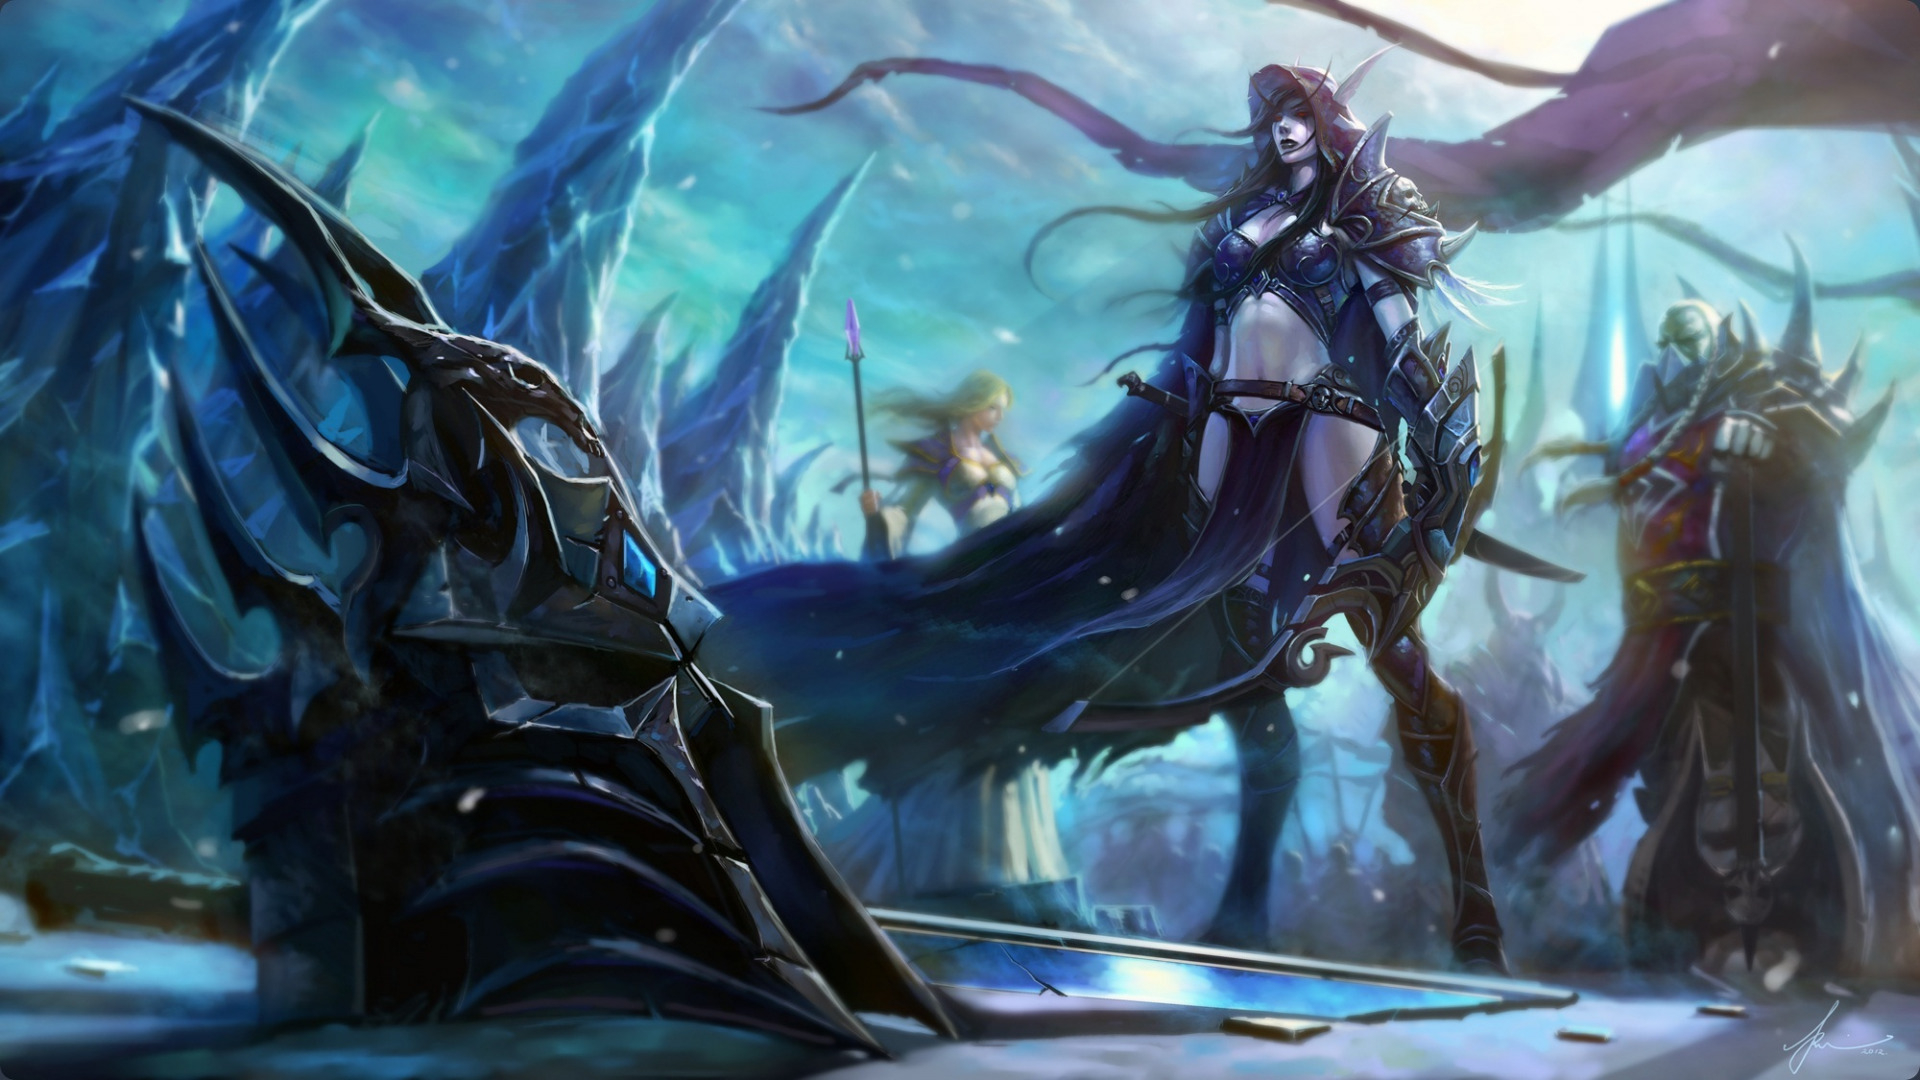 1920x1080 Download wallpaper WoW, World of warcraft, lady, Sylvanas Windrunner, wrath of the lich king, Saurfang, Sylvanas Windrunner, wotlk, Jaina Proudmoore, section games in resoluti